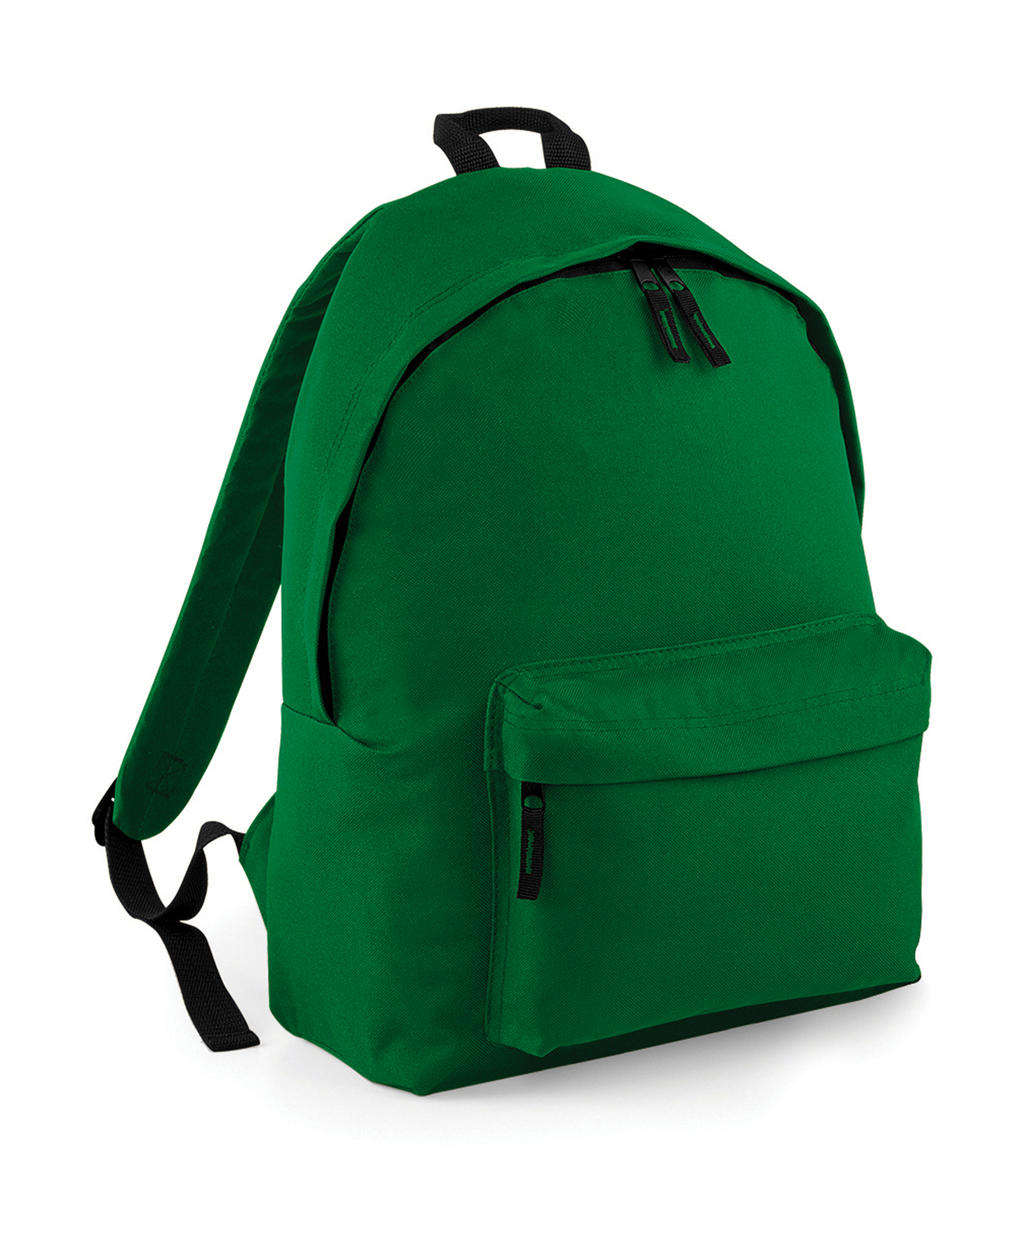  Original Fashion Backpack in Farbe Kelly Green